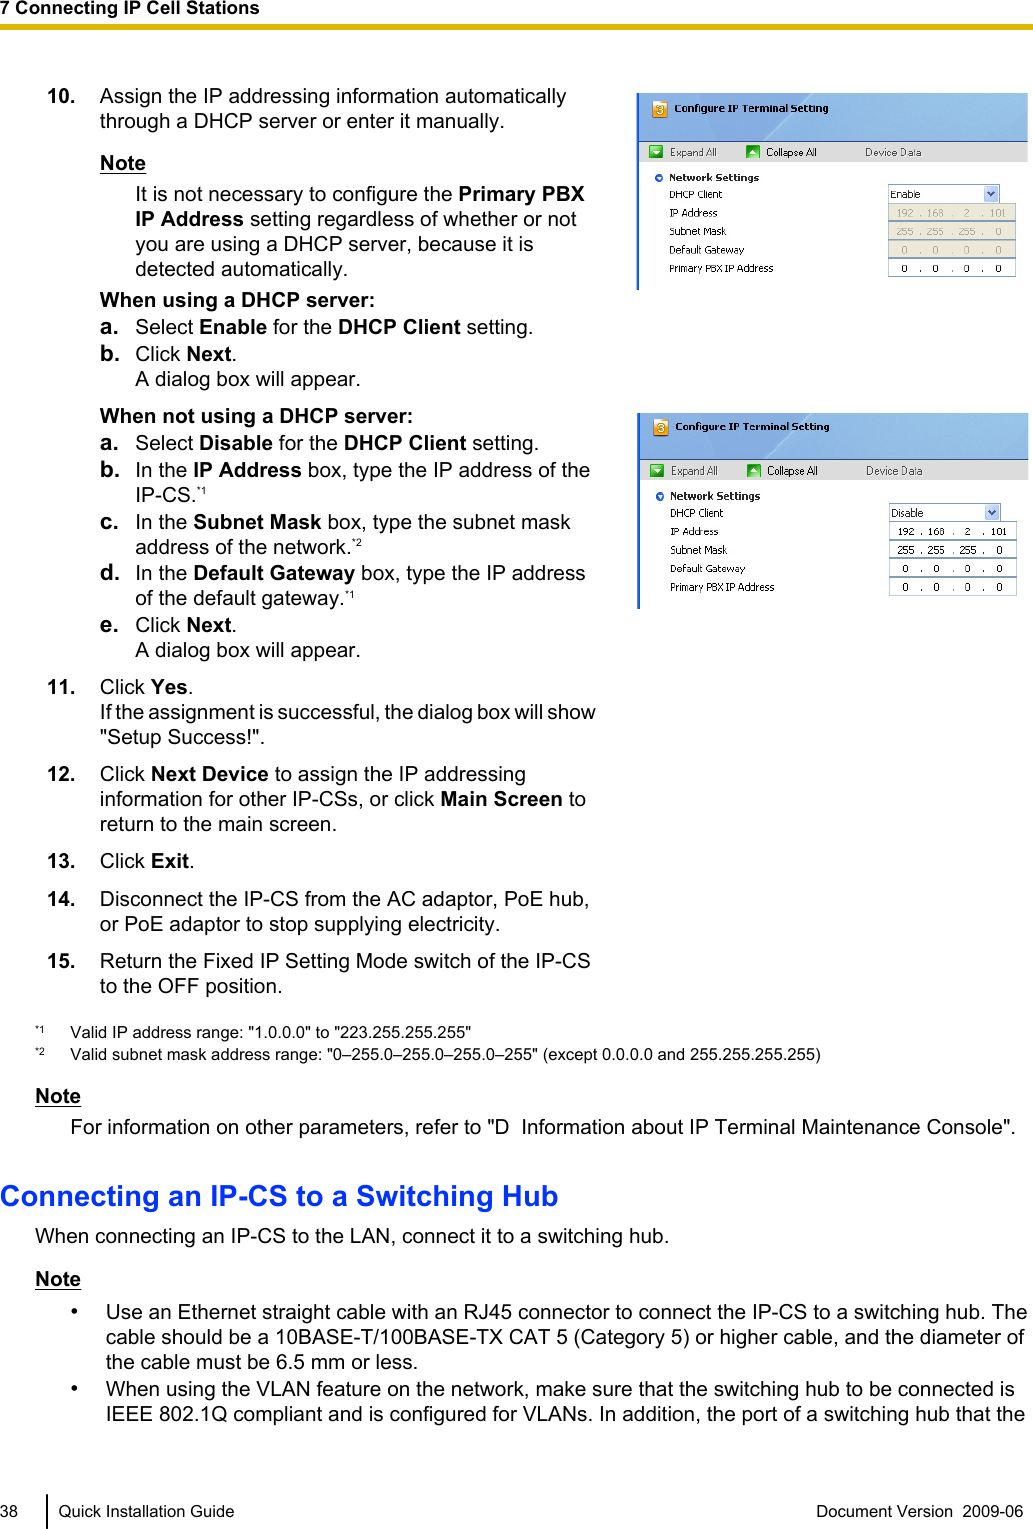 10. Assign the IP addressing information automaticallythrough a DHCP server or enter it manually.NoteIt is not necessary to configure the Primary PBXIP Address setting regardless of whether or notyou are using a DHCP server, because it isdetected automatically.When using a DHCP server:a. Select Enable for the DHCP Client setting.b. Click Next.A dialog box will appear.When not using a DHCP server:a. Select Disable for the DHCP Client setting.b. In the IP Address box, type the IP address of theIP-CS.*1c. In the Subnet Mask box, type the subnet maskaddress of the network.*2d. In the Default Gateway box, type the IP addressof the default gateway.*1e. Click Next.A dialog box will appear.11. Click Yes.If the assignment is successful, the dialog box will show&quot;Setup Success!&quot;.12. Click Next Device to assign the IP addressinginformation for other IP-CSs, or click Main Screen toreturn to the main screen.13. Click Exit.14. Disconnect the IP-CS from the AC adaptor, PoE hub,or PoE adaptor to stop supplying electricity.15. Return the Fixed IP Setting Mode switch of the IP-CSto the OFF position.*1 Valid IP address range: &quot;1.0.0.0&quot; to &quot;223.255.255.255&quot;*2 Valid subnet mask address range: &quot;0–255.0–255.0–255.0–255&quot; (except 0.0.0.0 and 255.255.255.255)NoteFor information on other parameters, refer to &quot;D  Information about IP Terminal Maintenance Console&quot;.Connecting an IP-CS to a Switching HubWhen connecting an IP-CS to the LAN, connect it to a switching hub.Note•Use an Ethernet straight cable with an RJ45 connector to connect the IP-CS to a switching hub. Thecable should be a 10BASE-T/100BASE-TX CAT 5 (Category 5) or higher cable, and the diameter ofthe cable must be 6.5 mm or less.•When using the VLAN feature on the network, make sure that the switching hub to be connected isIEEE 802.1Q compliant and is configured for VLANs. In addition, the port of a switching hub that the38 Quick Installation Guide Document Version  2009-06  7 Connecting IP Cell Stations